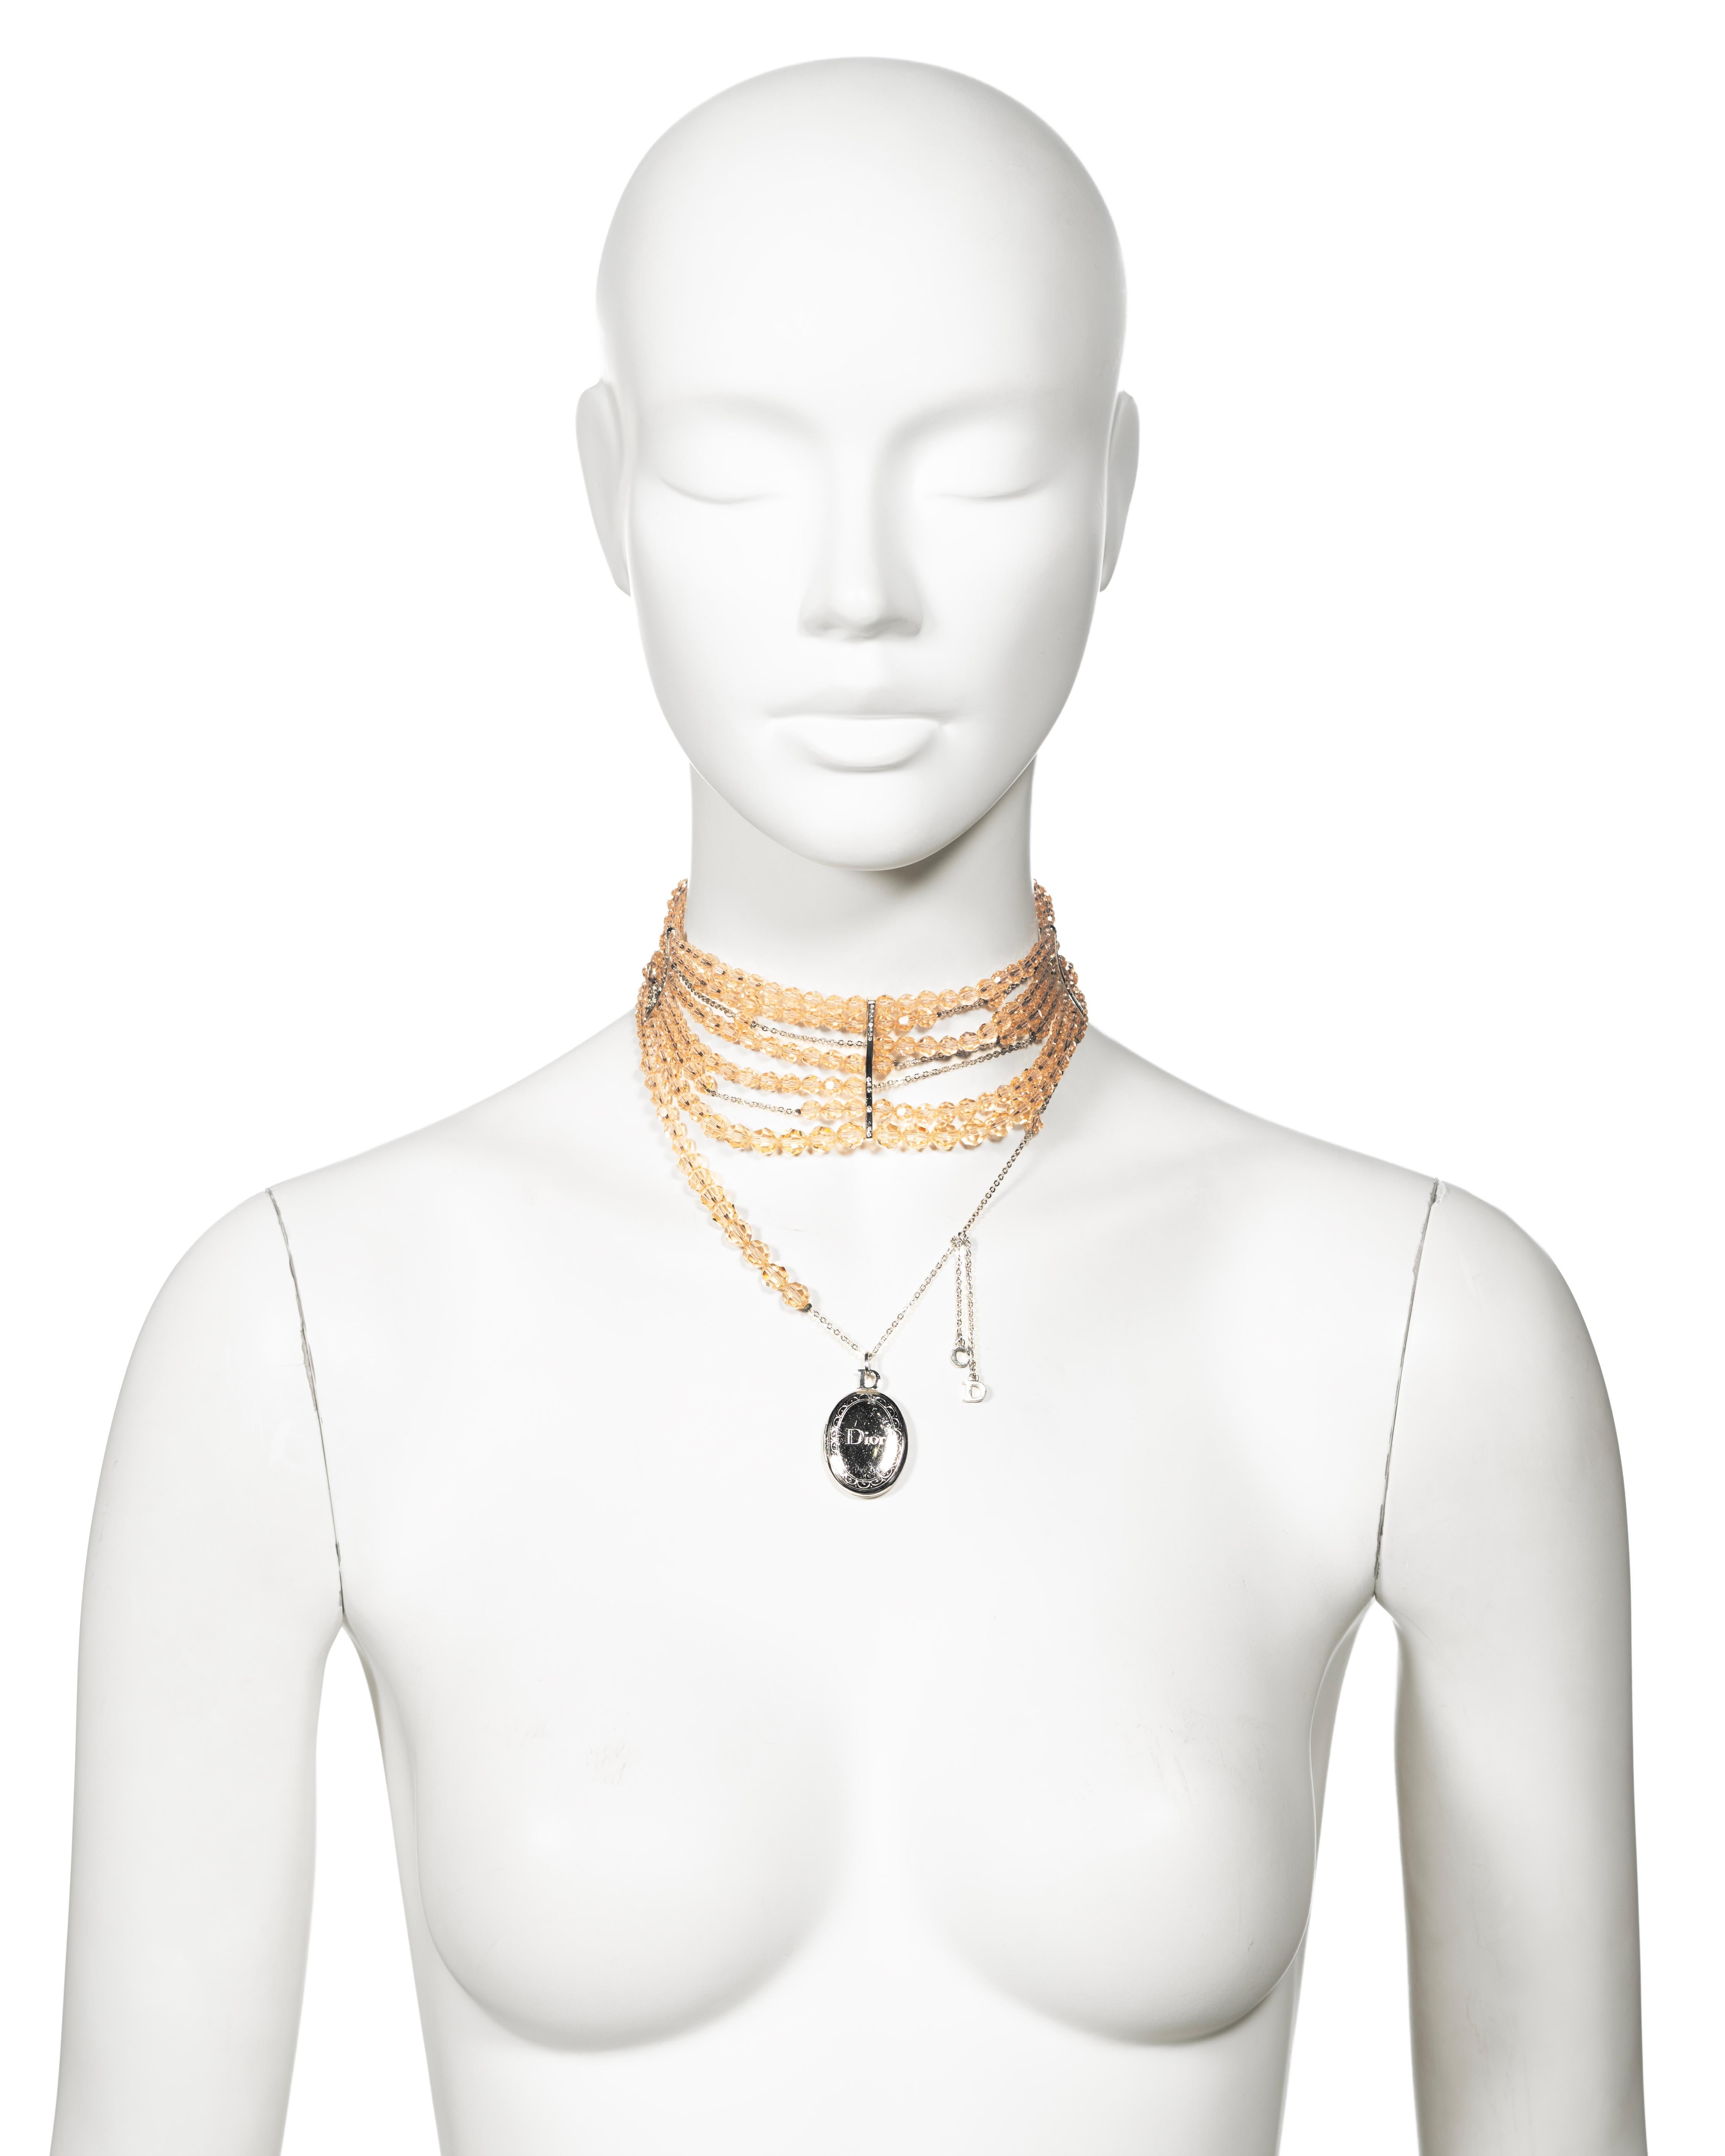 Christian Dior by John Galliano Distressed Peach Bead Choker Necklace, c. 2004 In Good Condition In London, GB